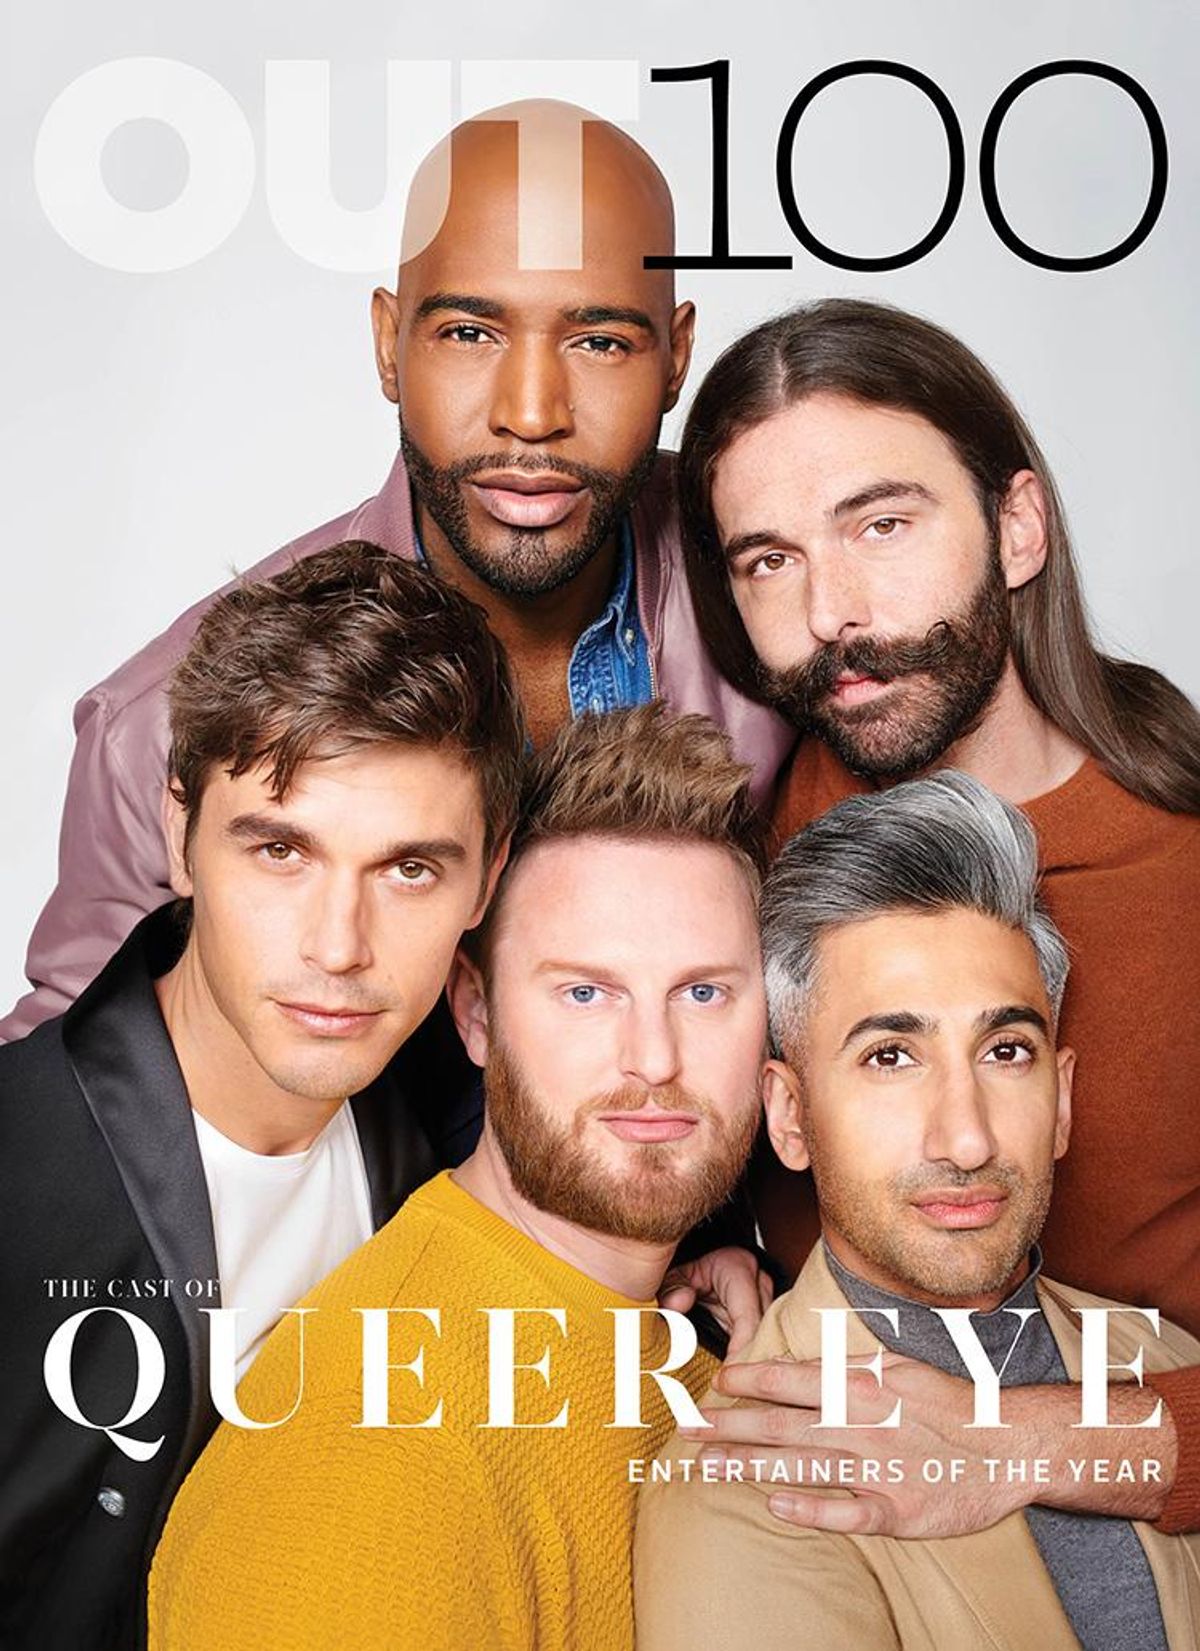 The Cast of Queer Eye